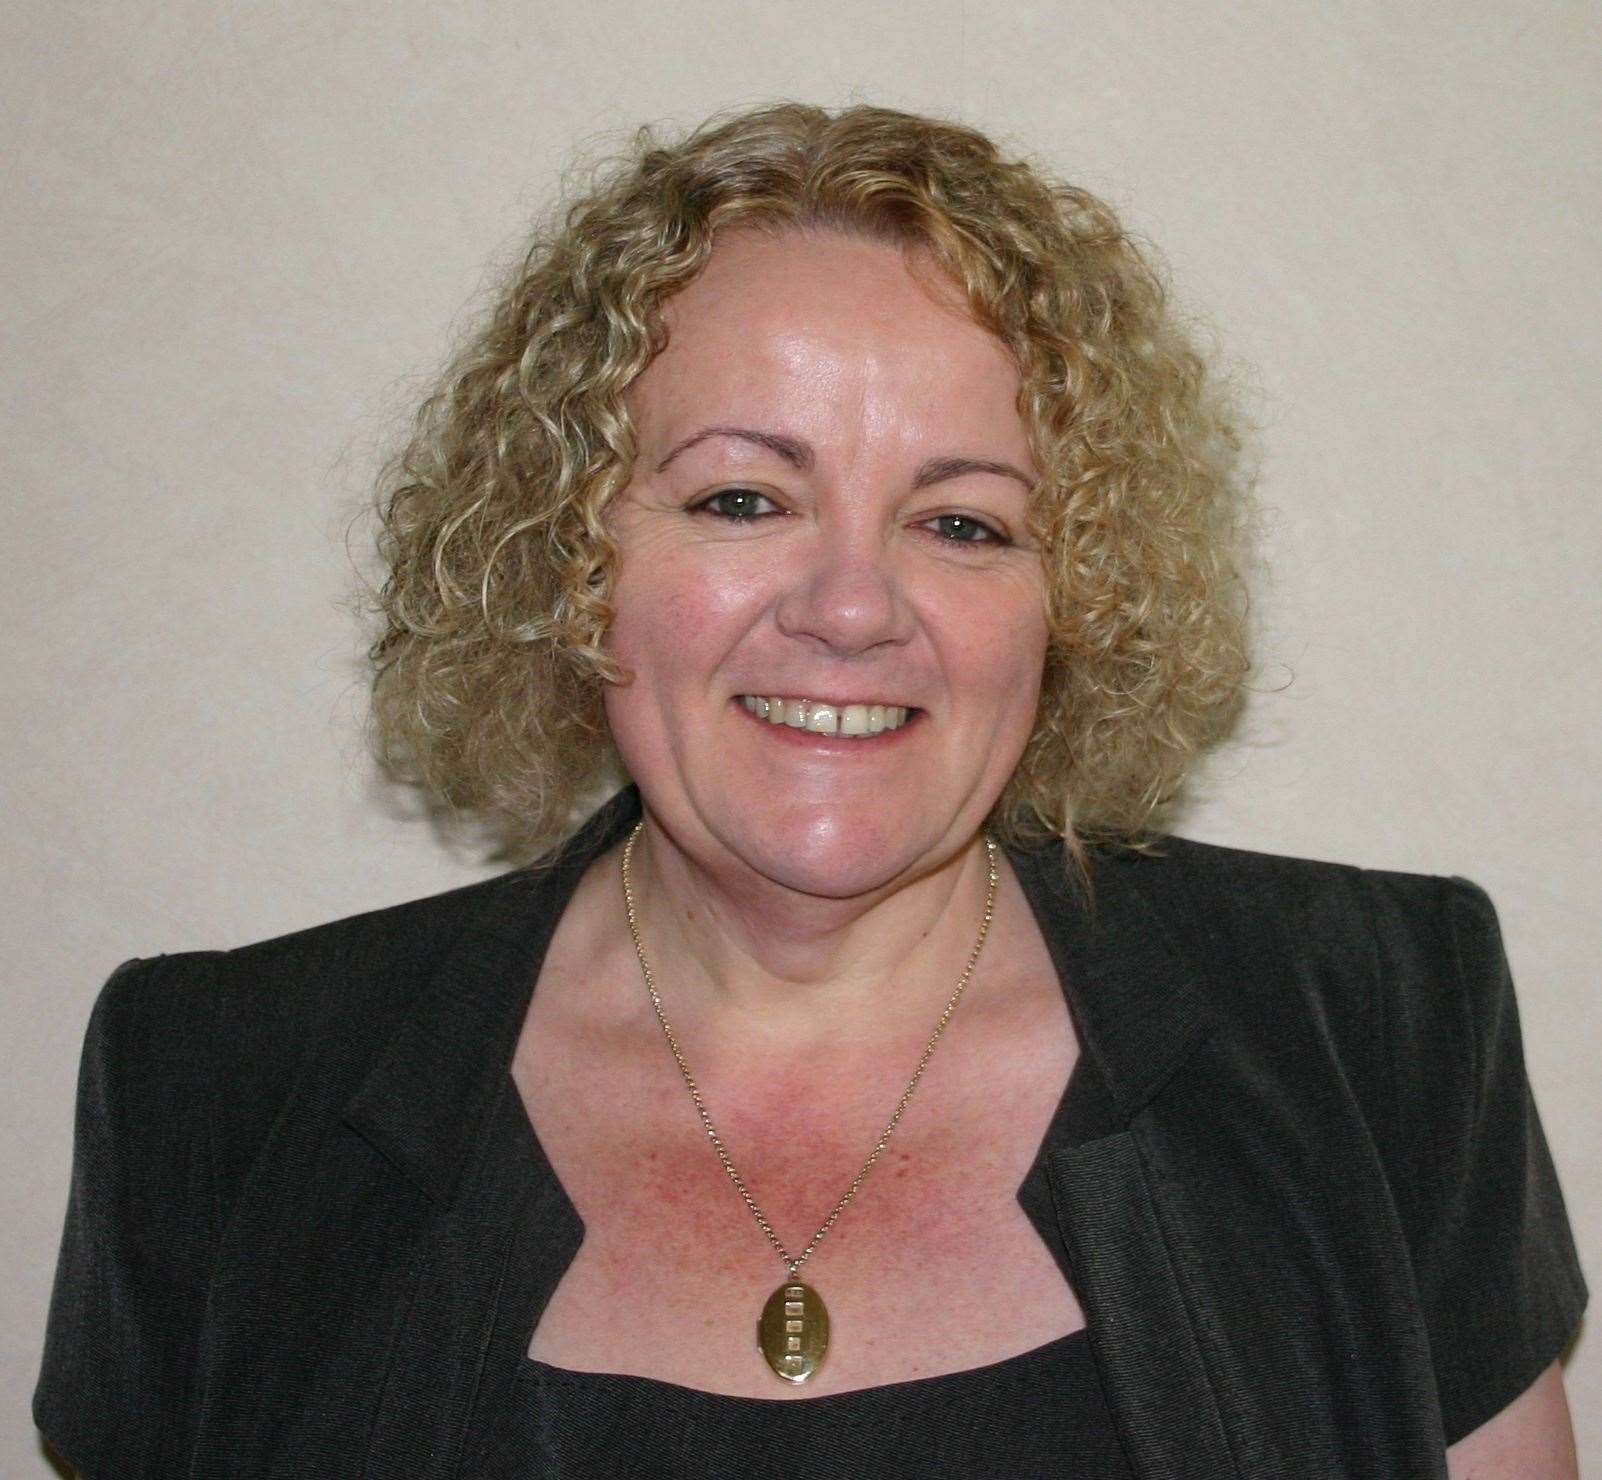 Julie Beilby on her appointment as chief executive in February 2013